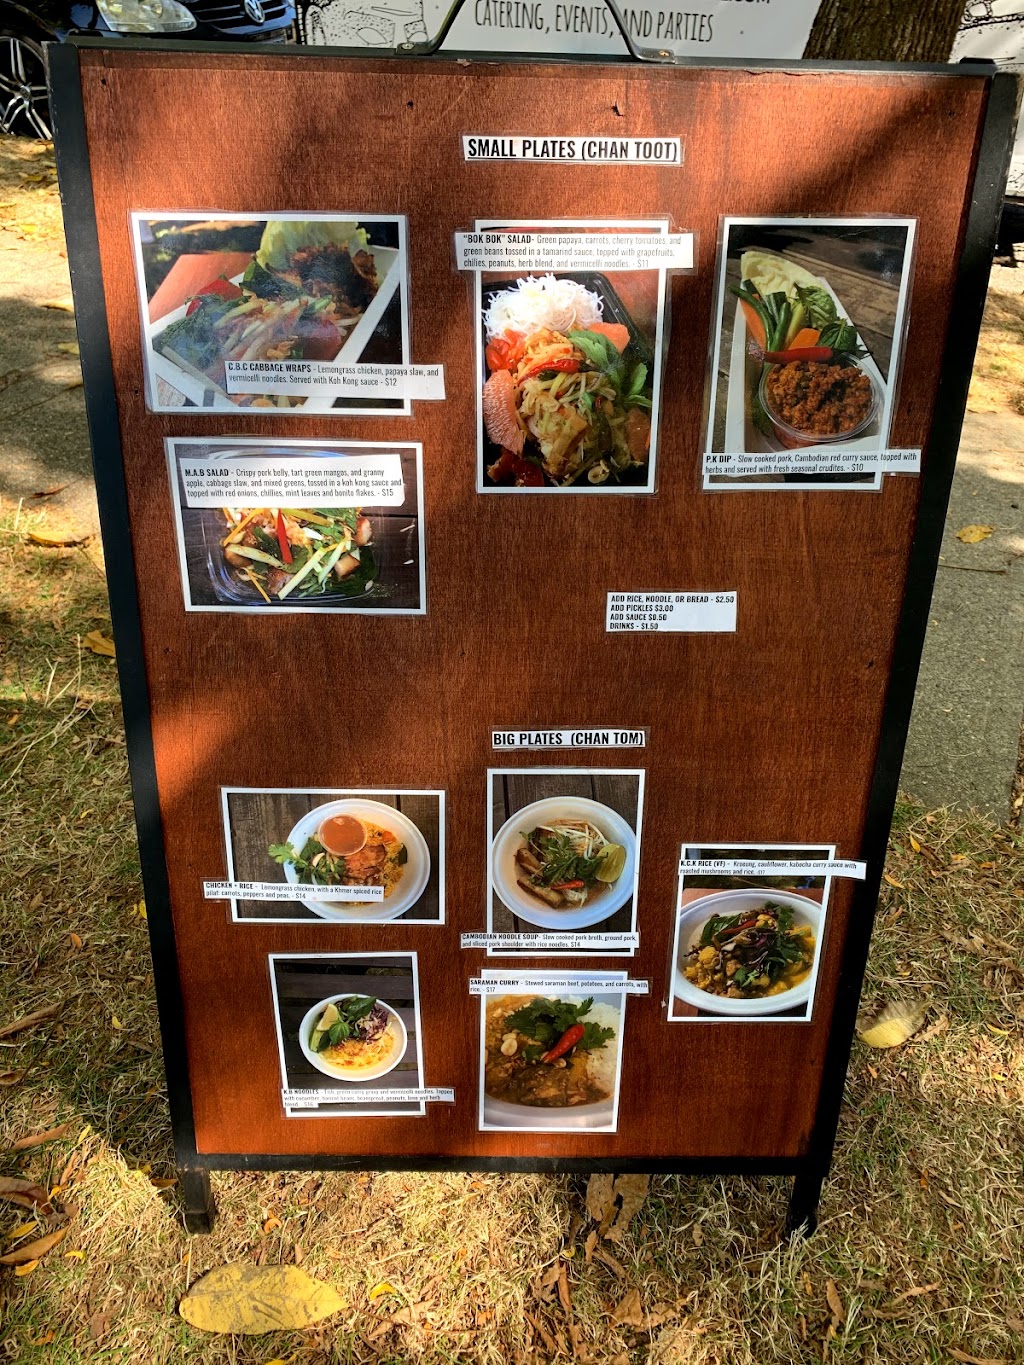 Rice+Soup - YVR - Cambodian food truck | W 16th Ave, Vancouver, BC V5Y 1Y6, Canada | Phone: (604) 715-4027